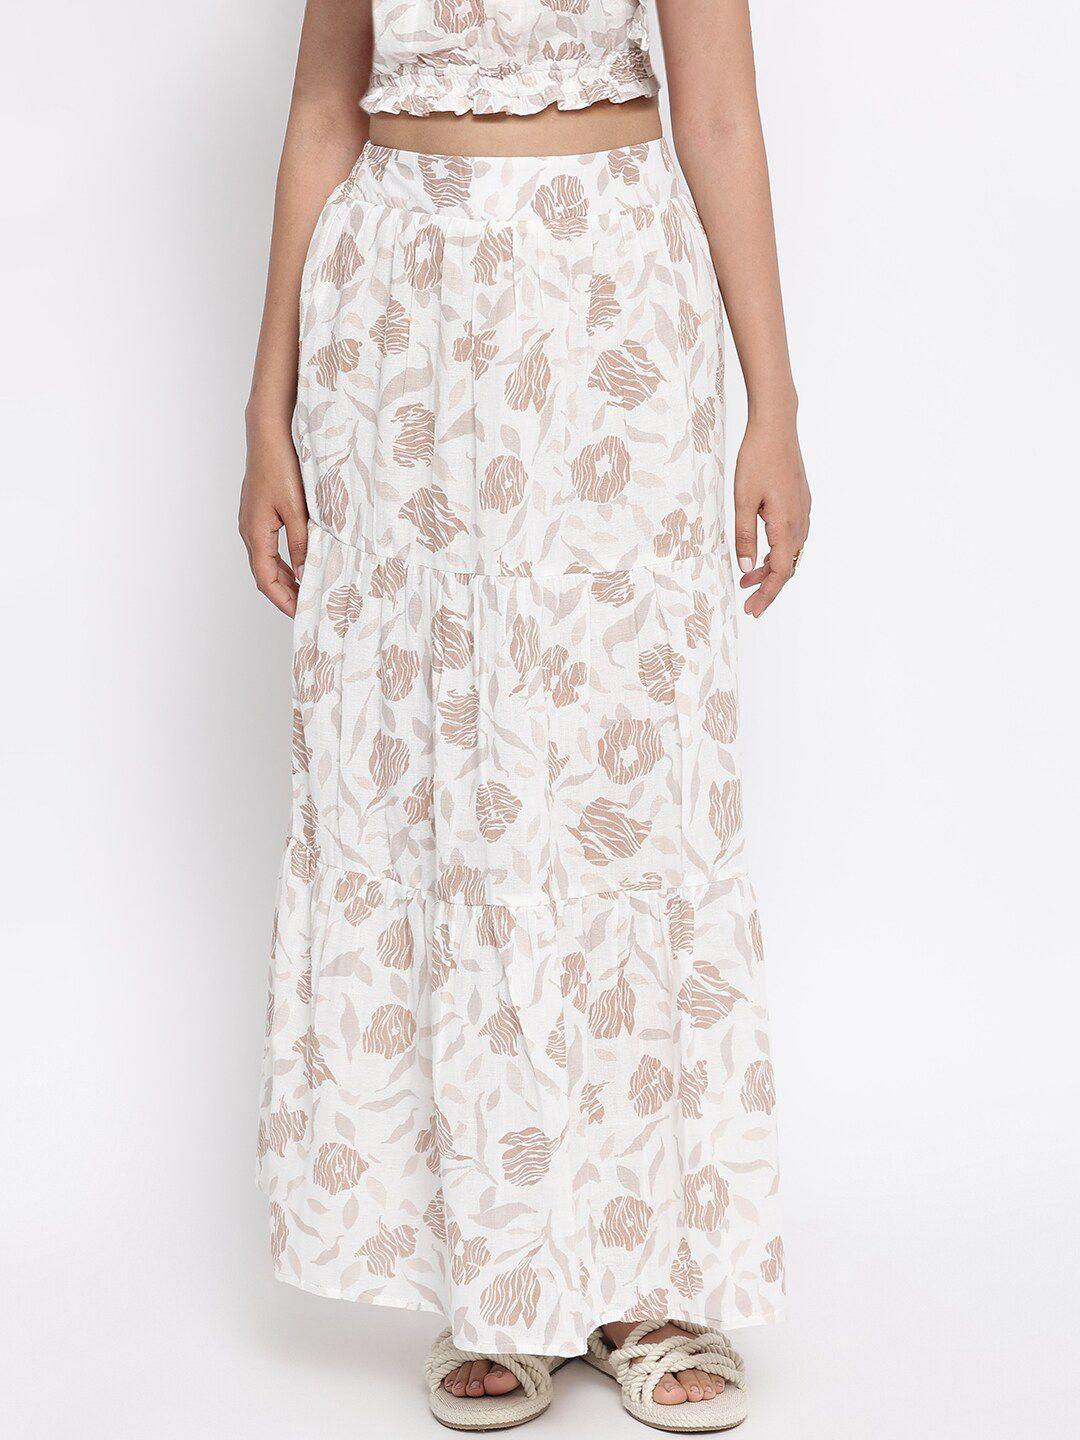 fabindia white & beige floral printed pure cotton tiered maxi skirt